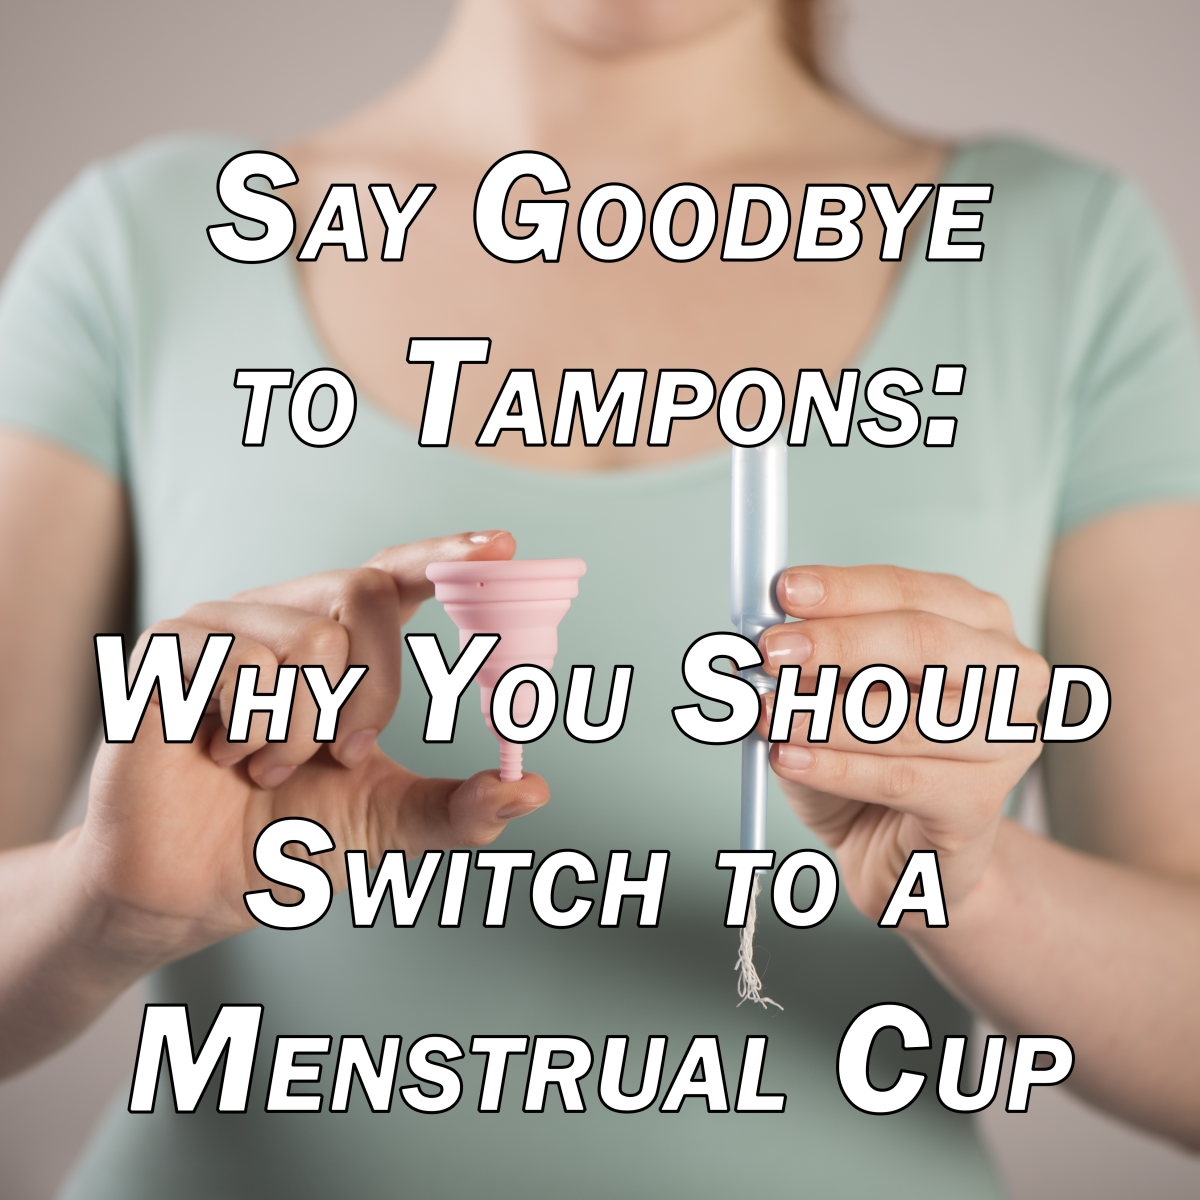 There are many benefits to switching to a menstrual cup.